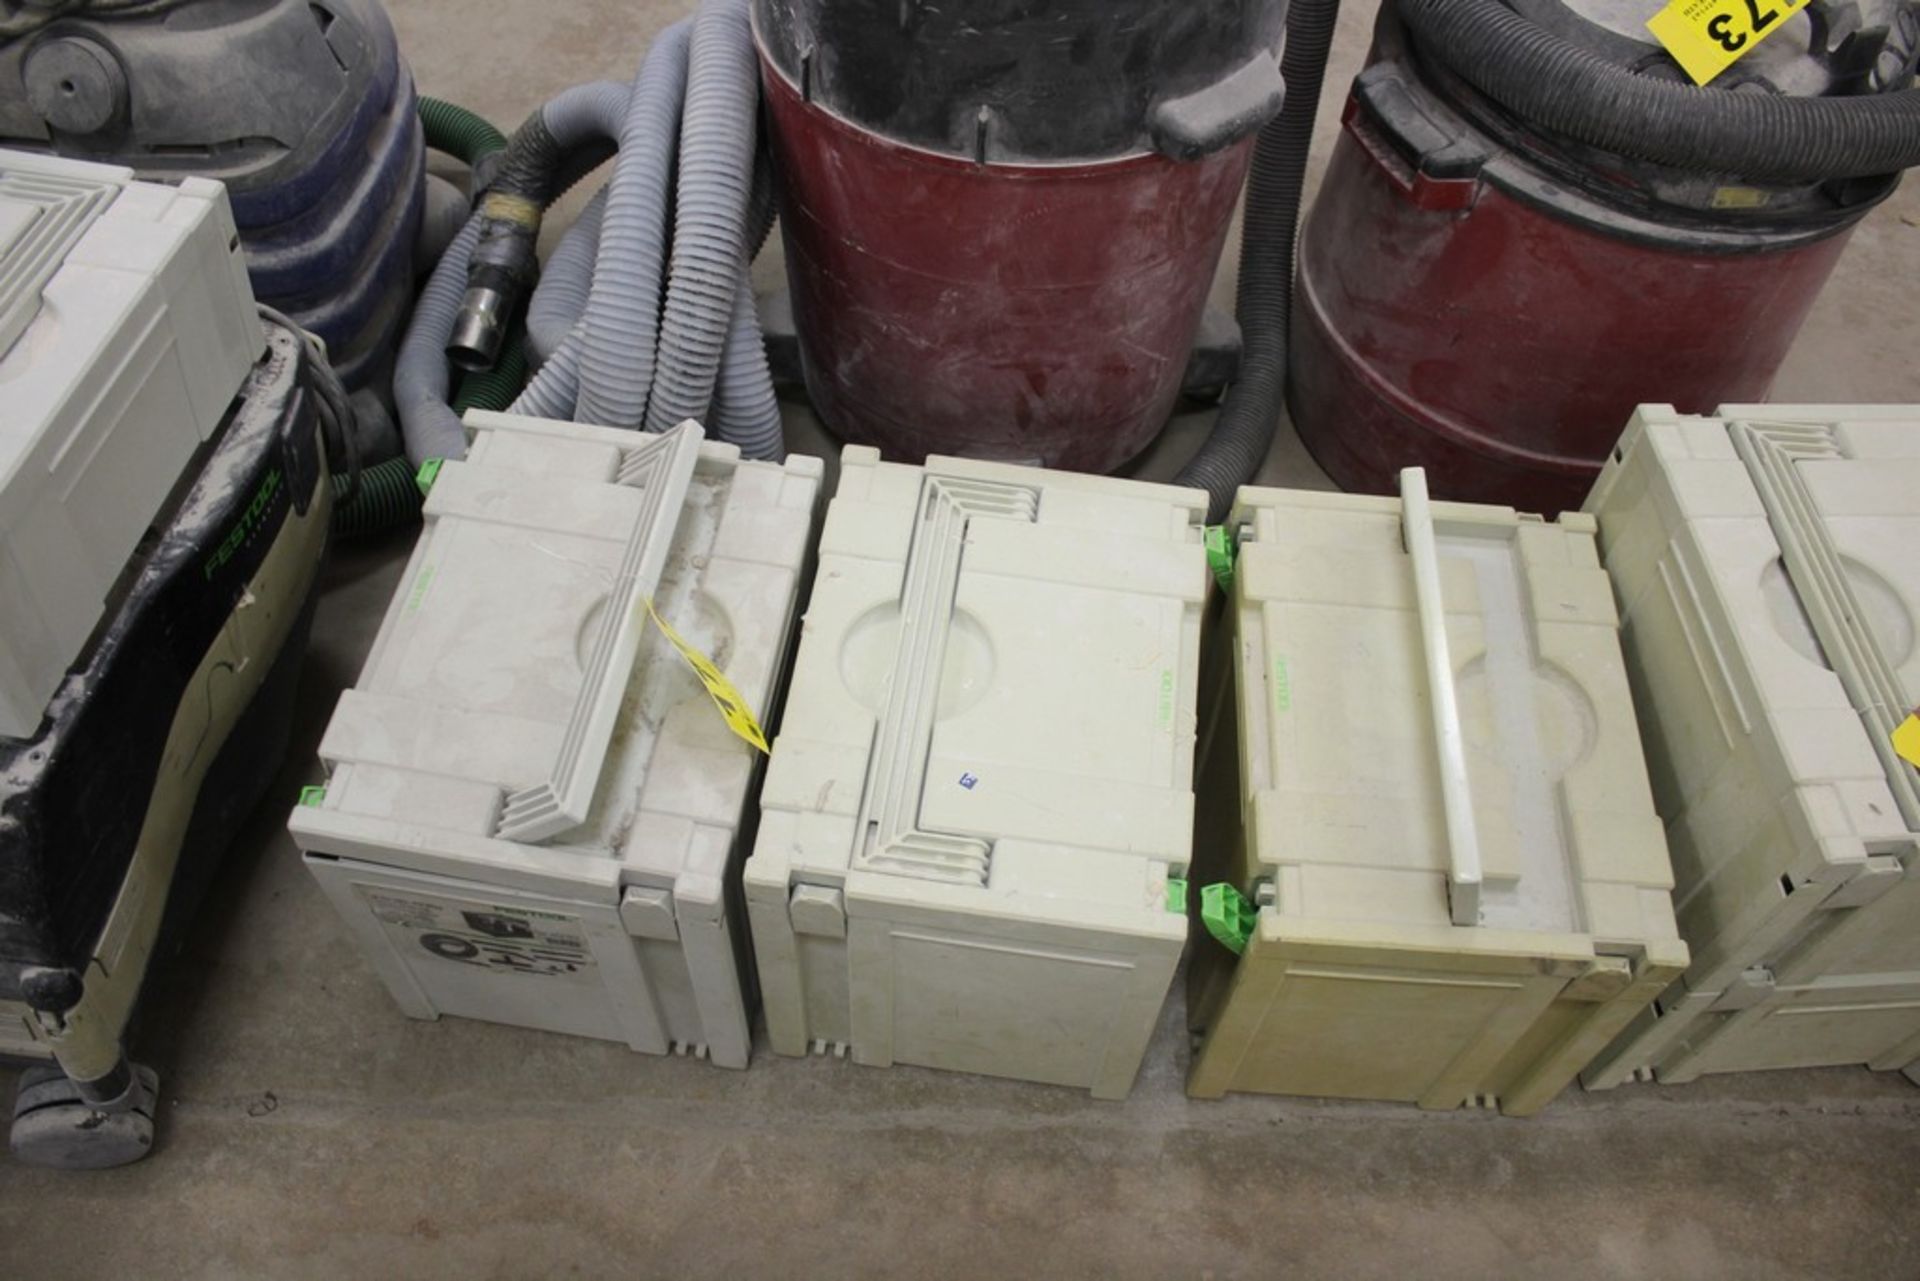 (3) FESTOOL DUST COLLECTION CHAMBERS